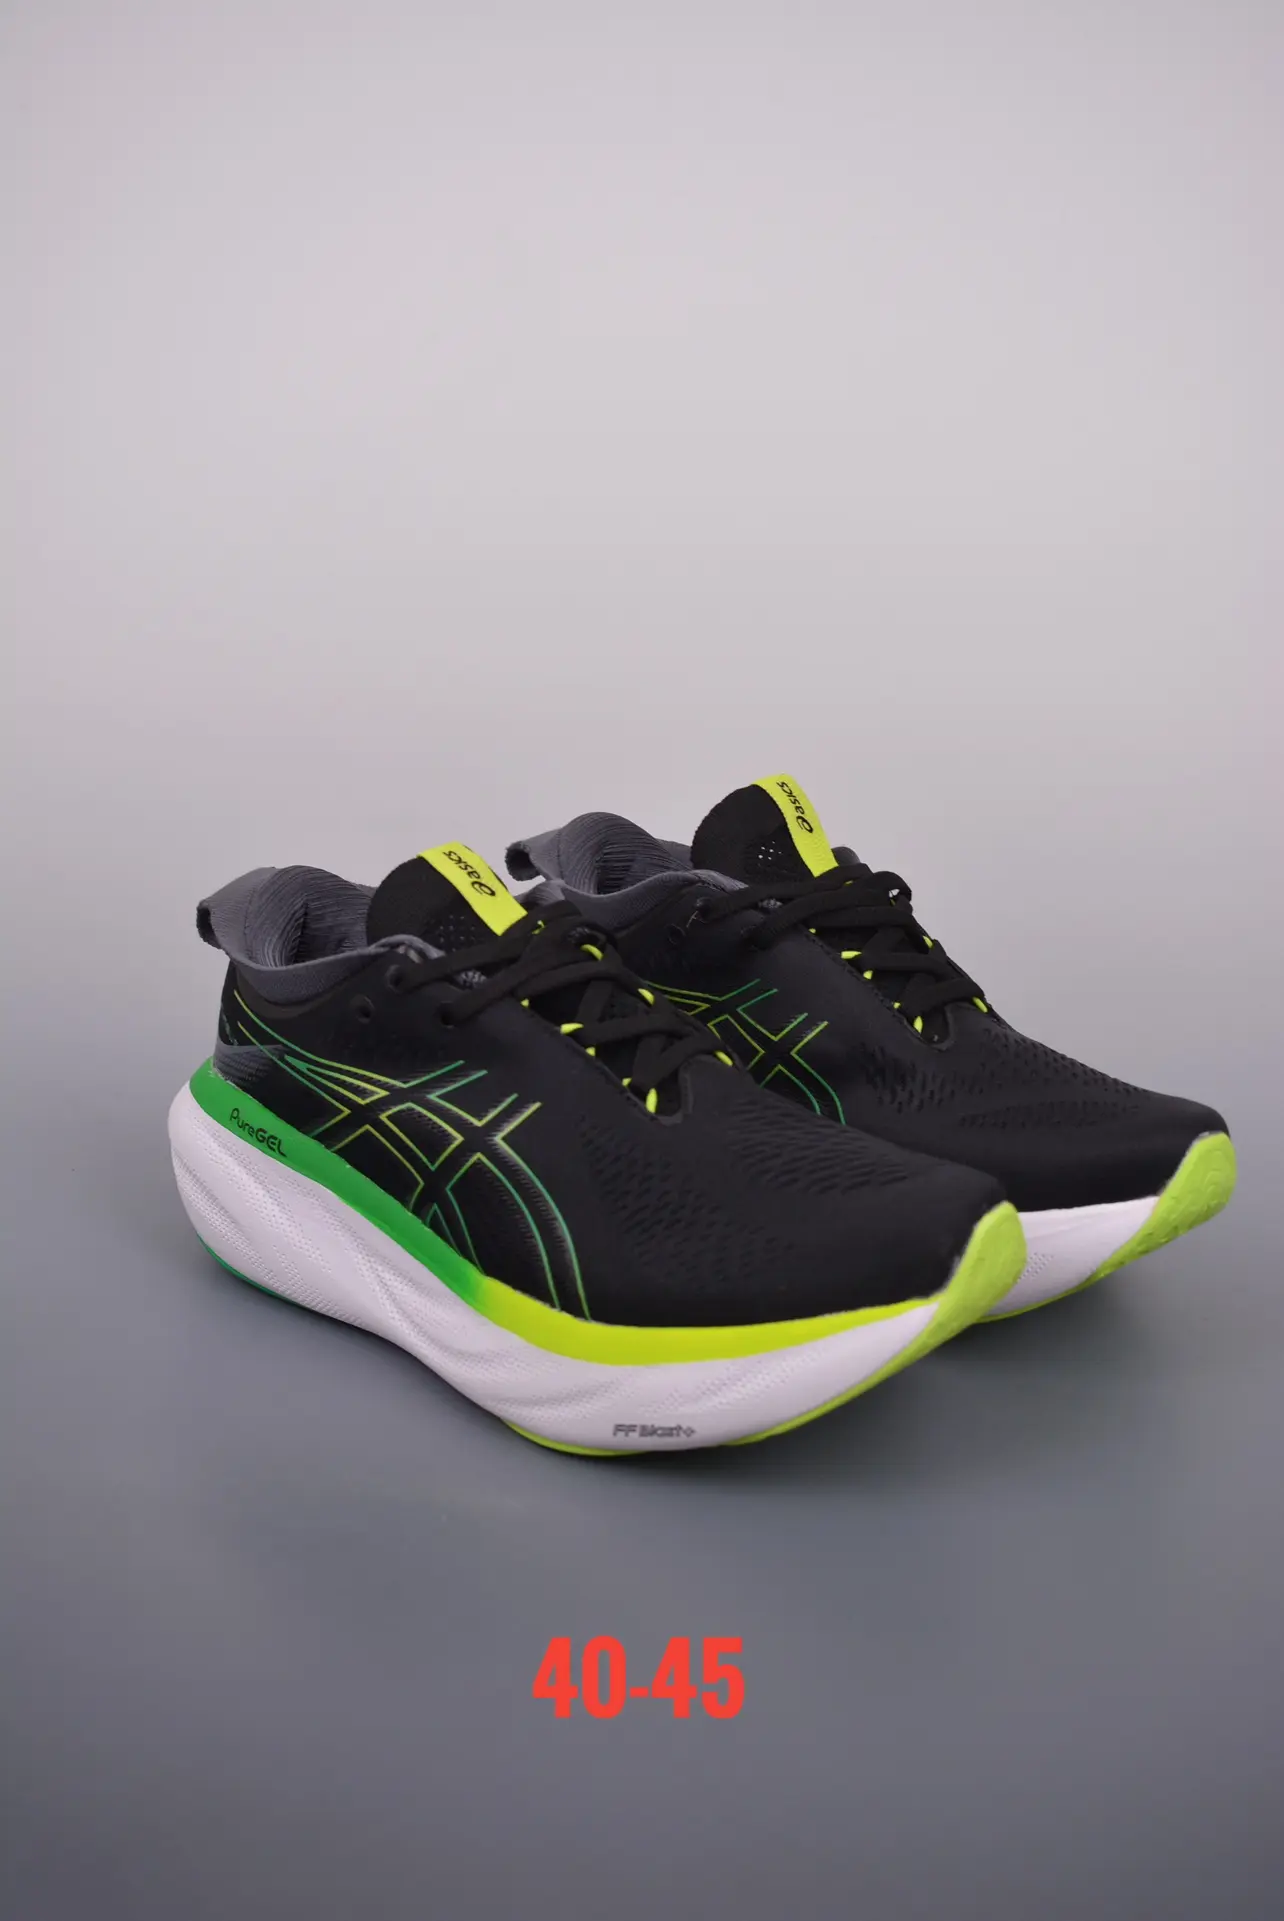 ASICS Patriot 12 Review - Affordable Performance Running Shoes for Men and Women | YtaYta